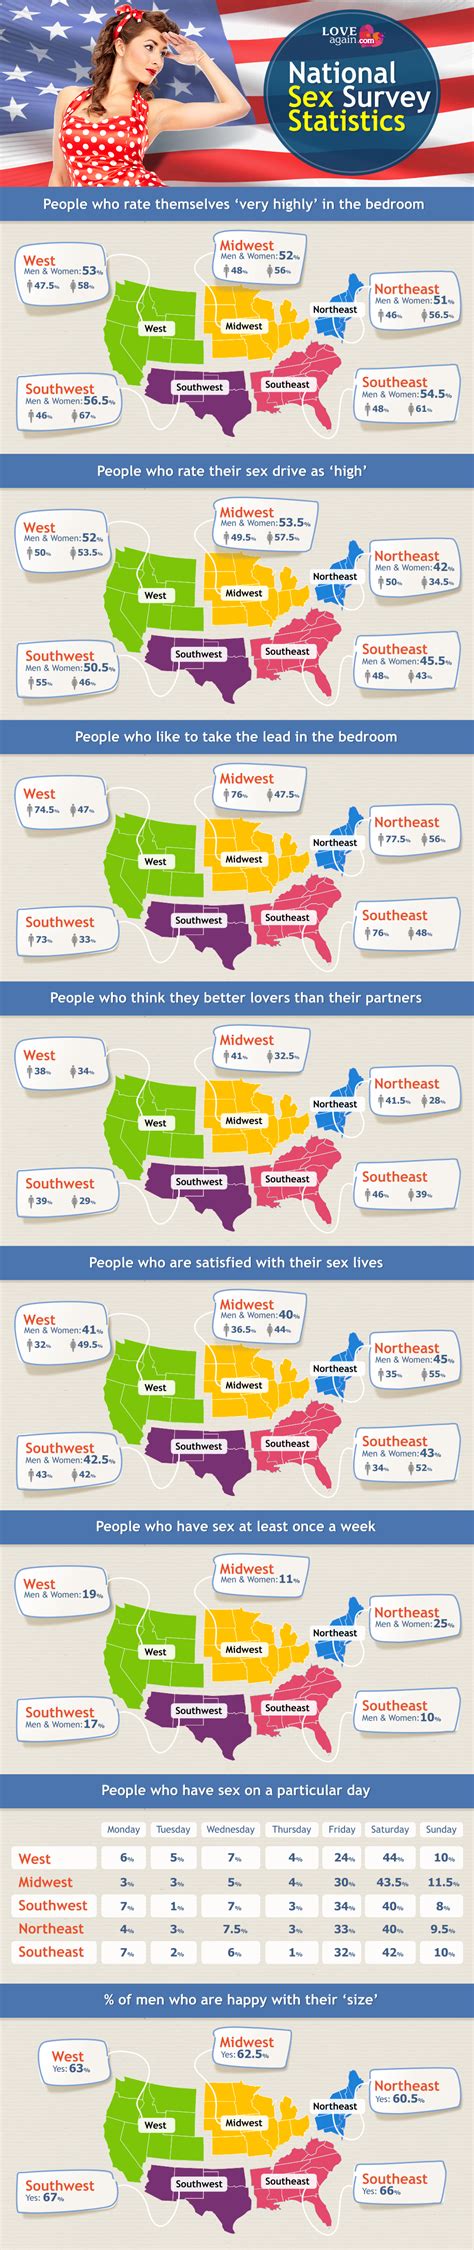 National Sex Survey Of Older Daters Show Which Region Is The Sexiest